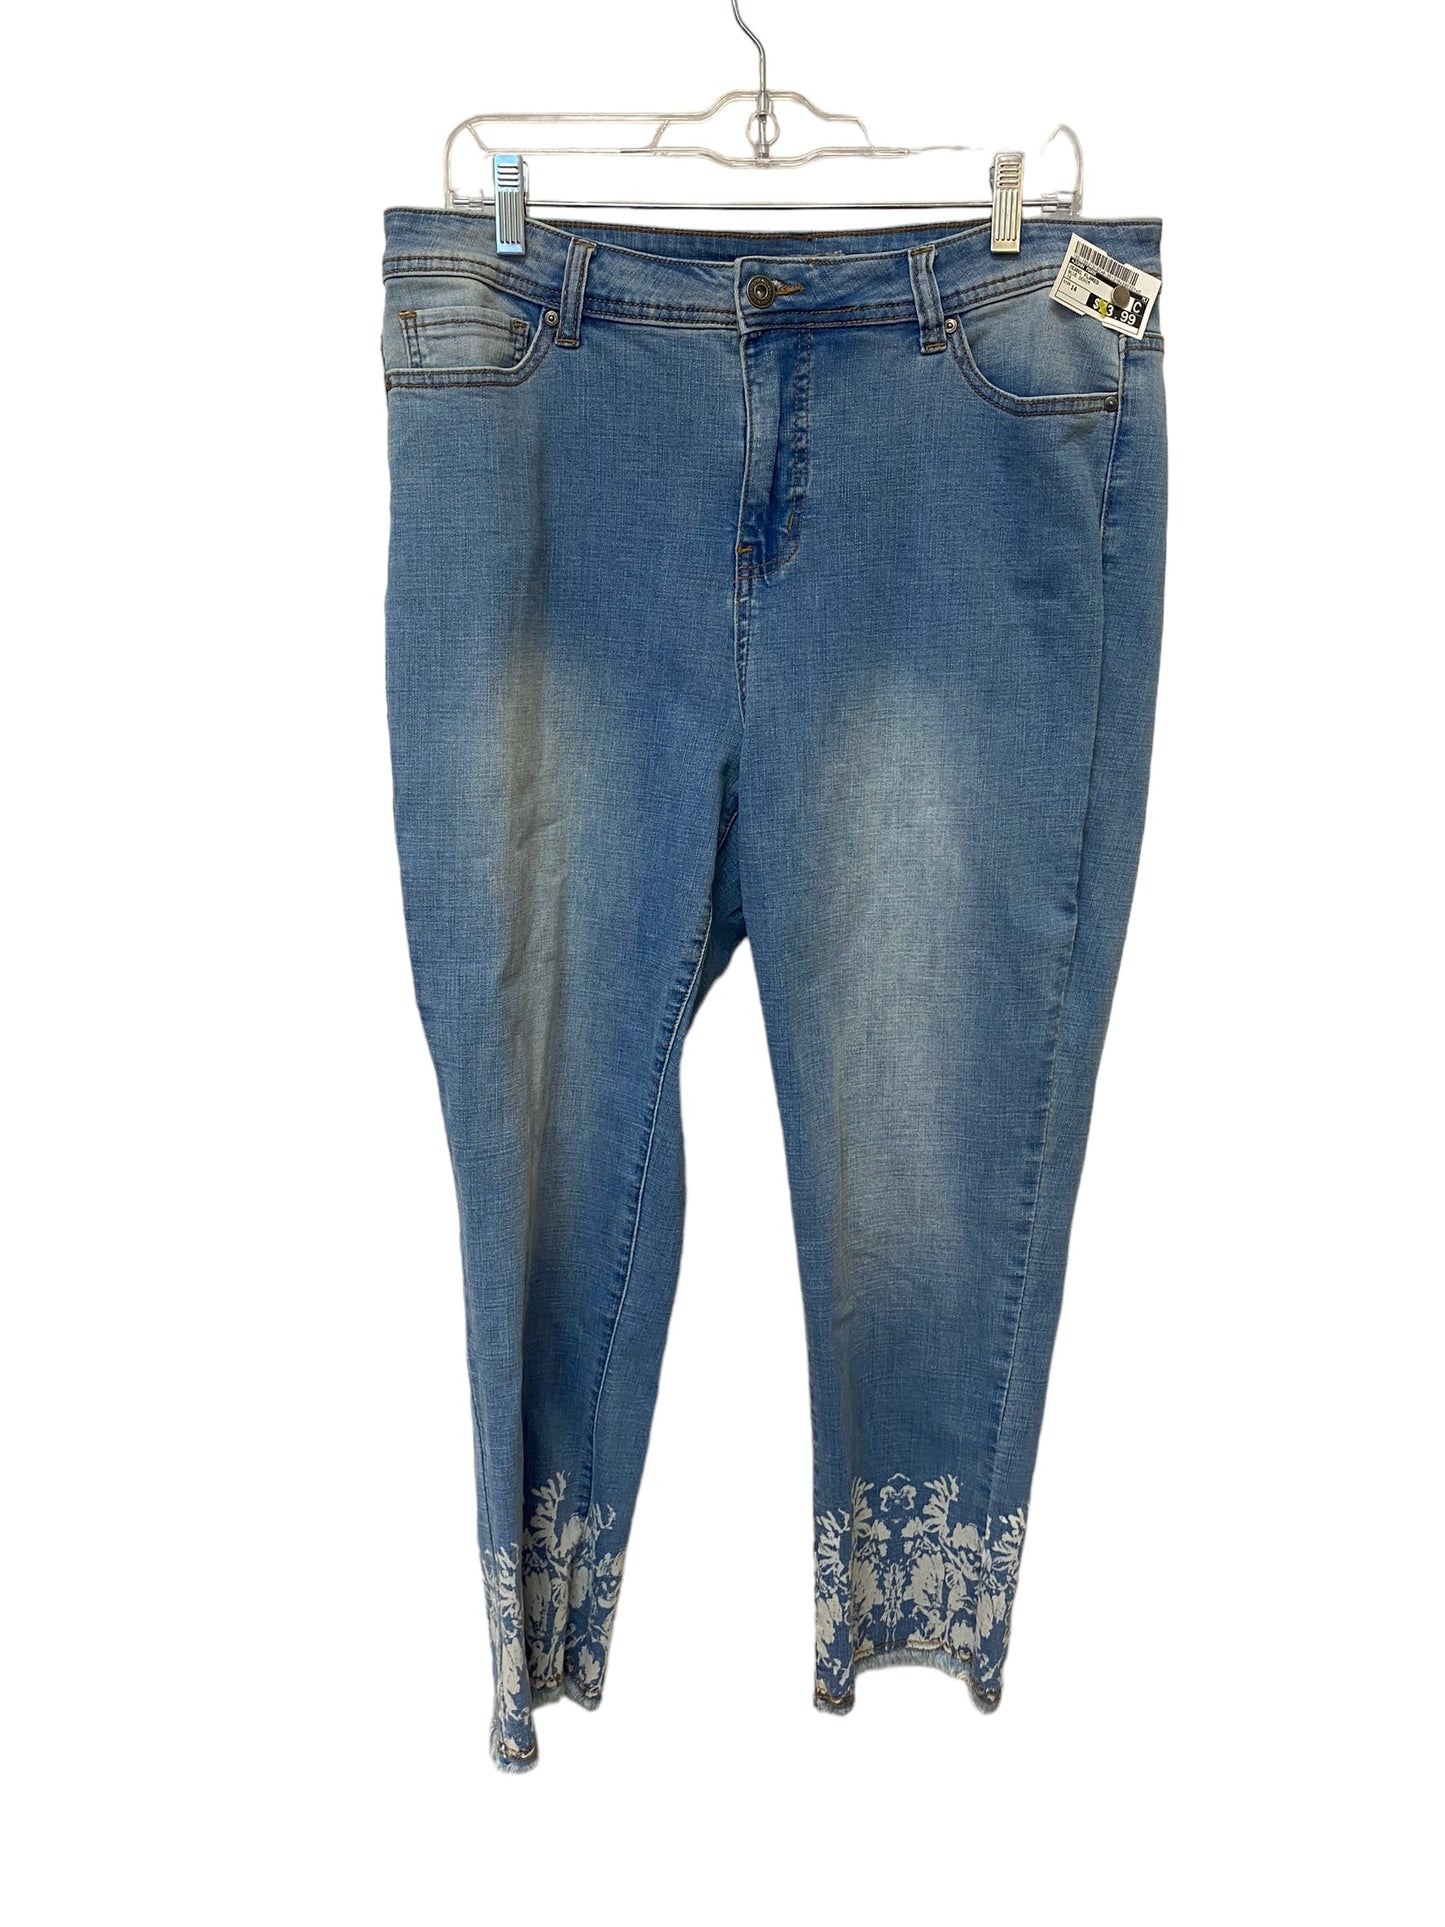 Jeans Flared By John Mark  Size: 14